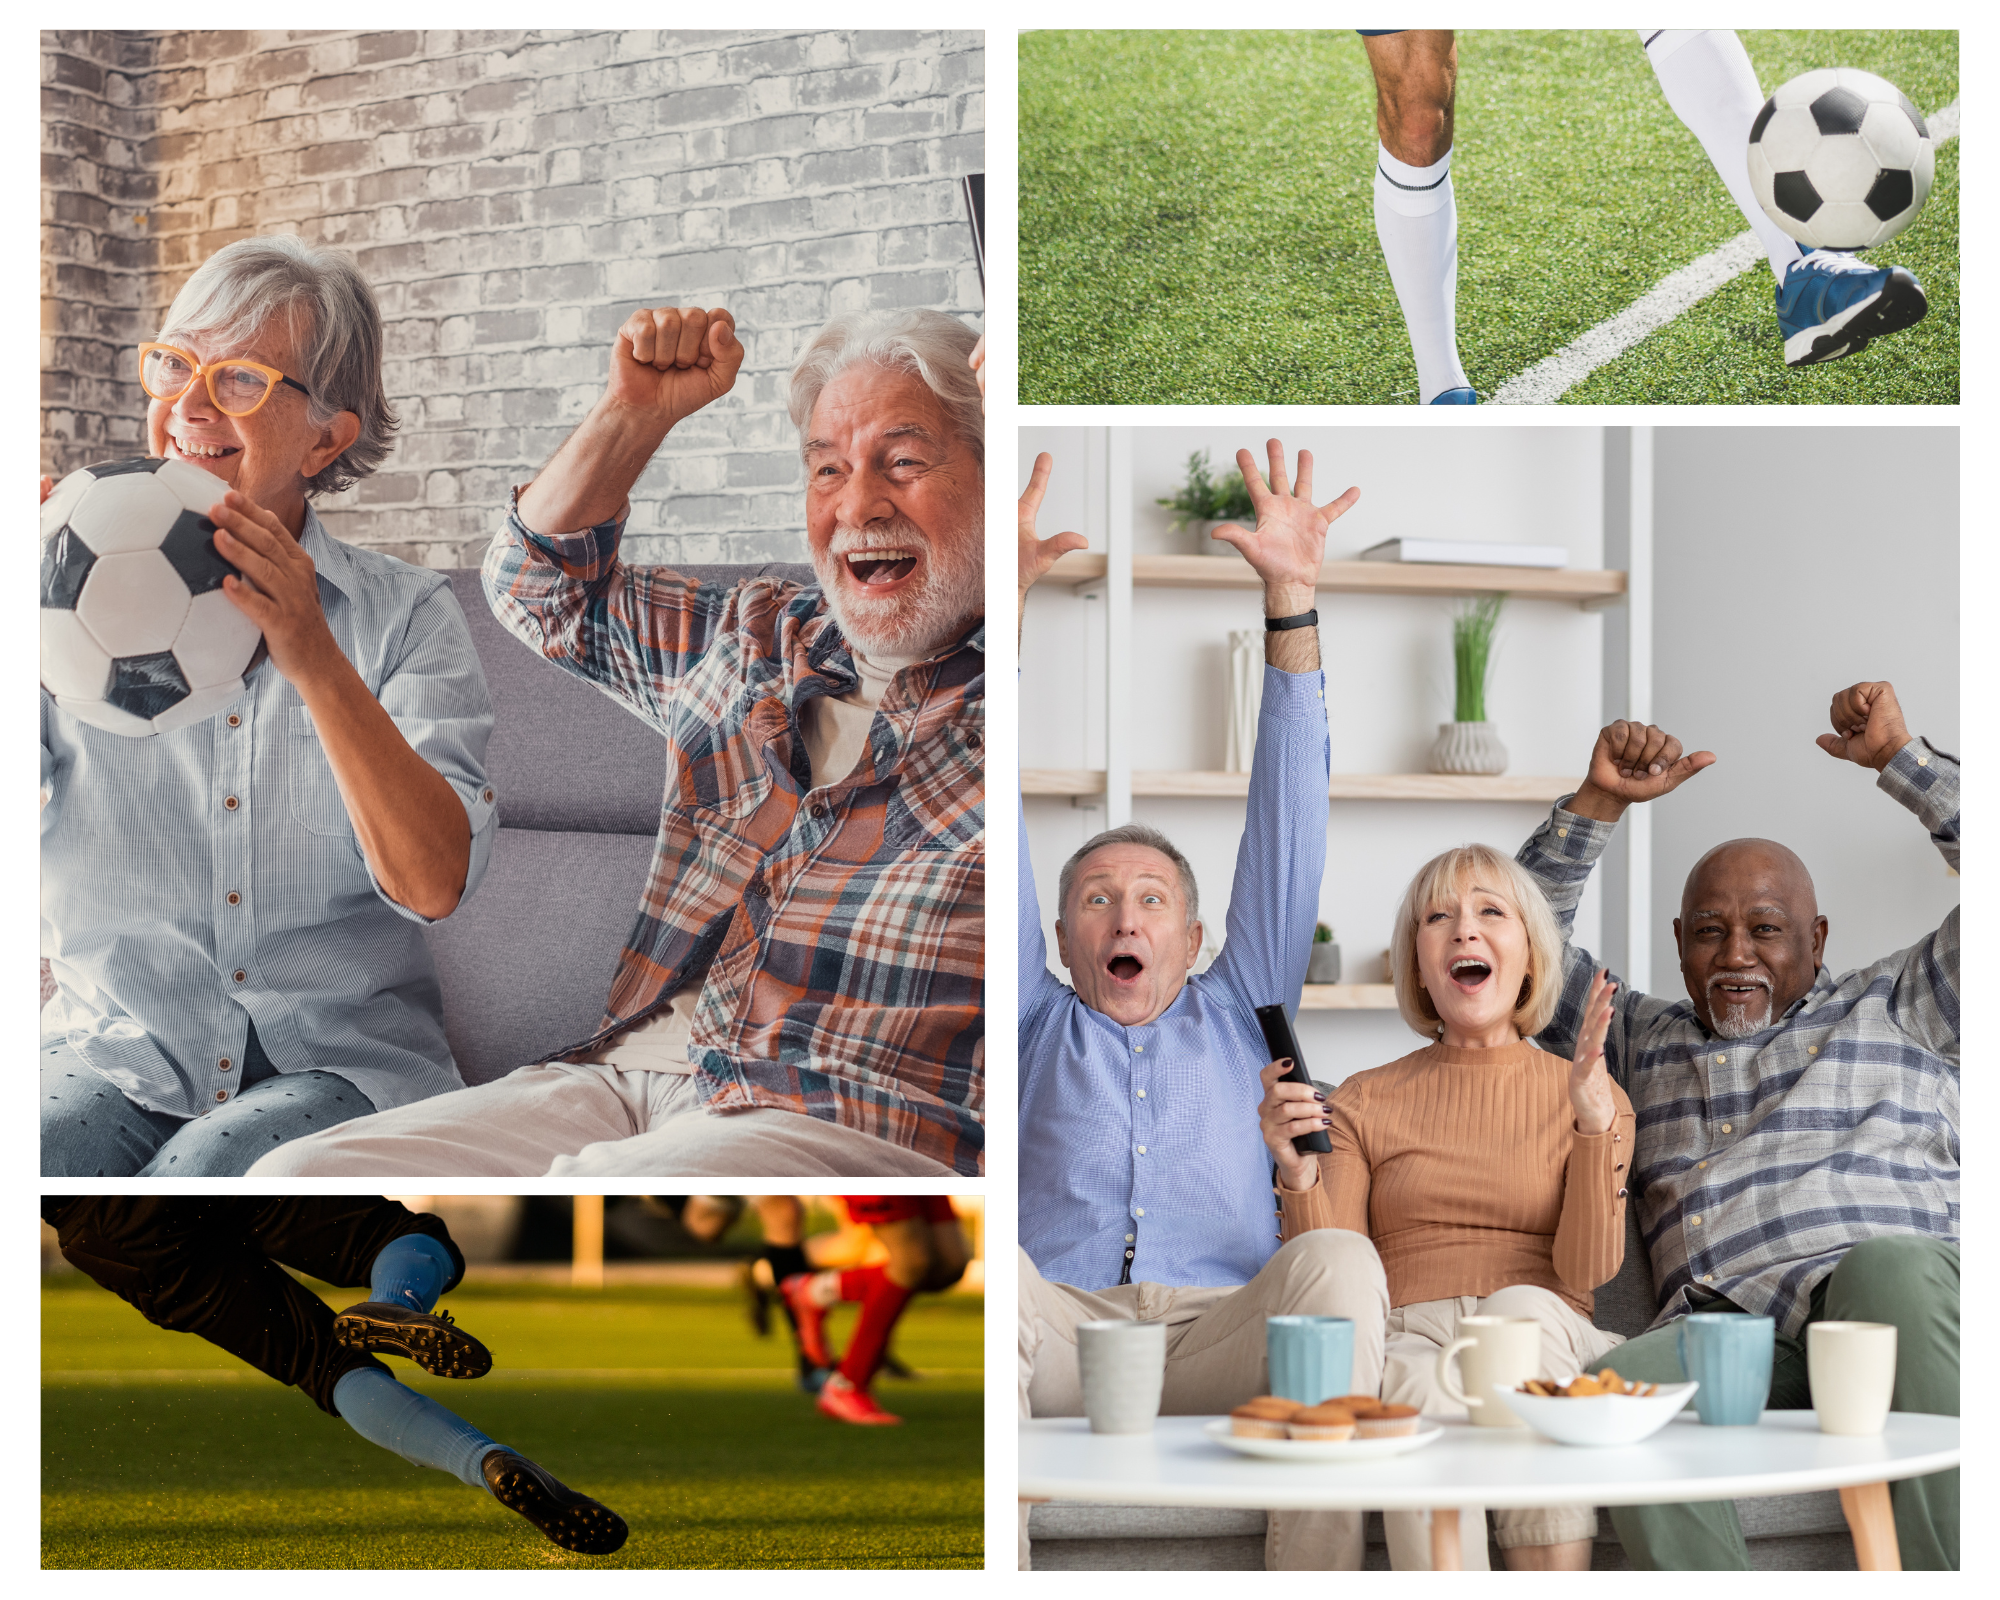 Enjoy the Women's World Cup with Seniors